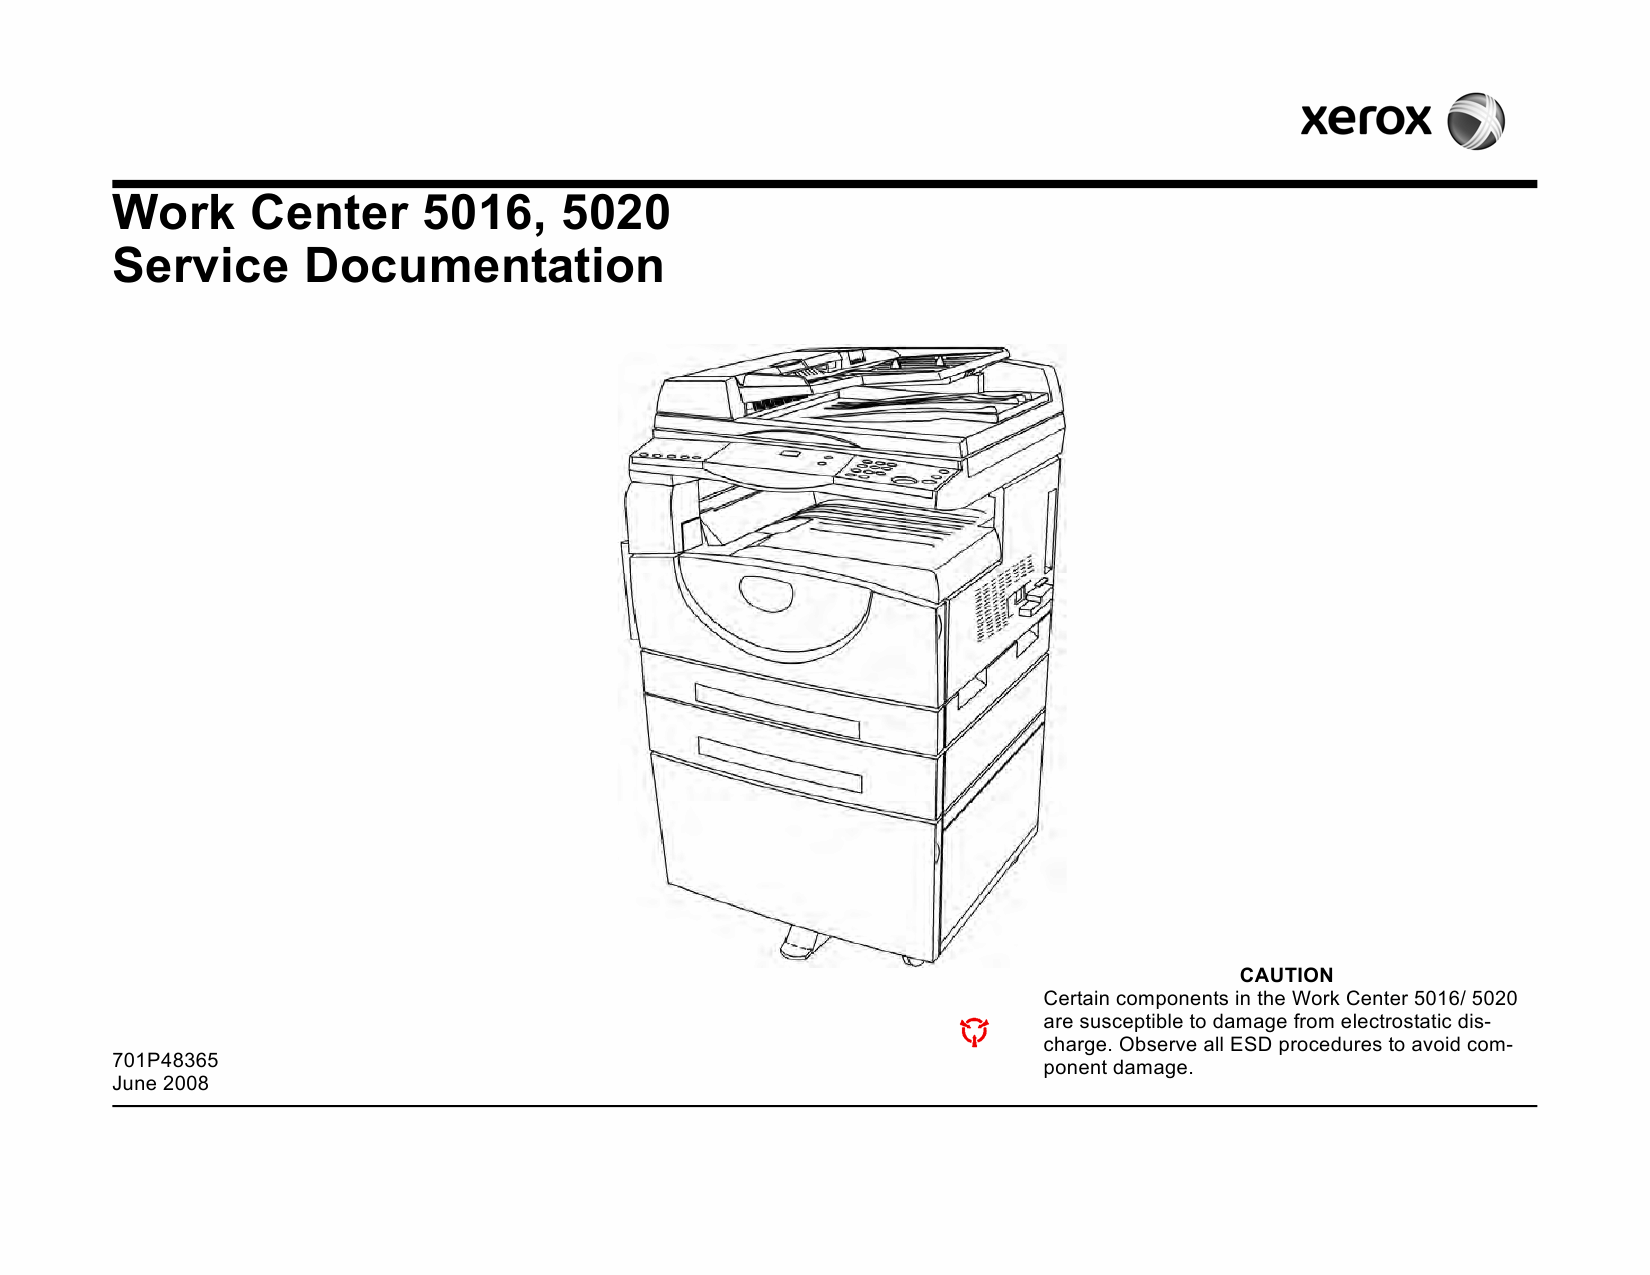 Xerox WorkCentre 5016 5020 Parts List and Service Manual-1